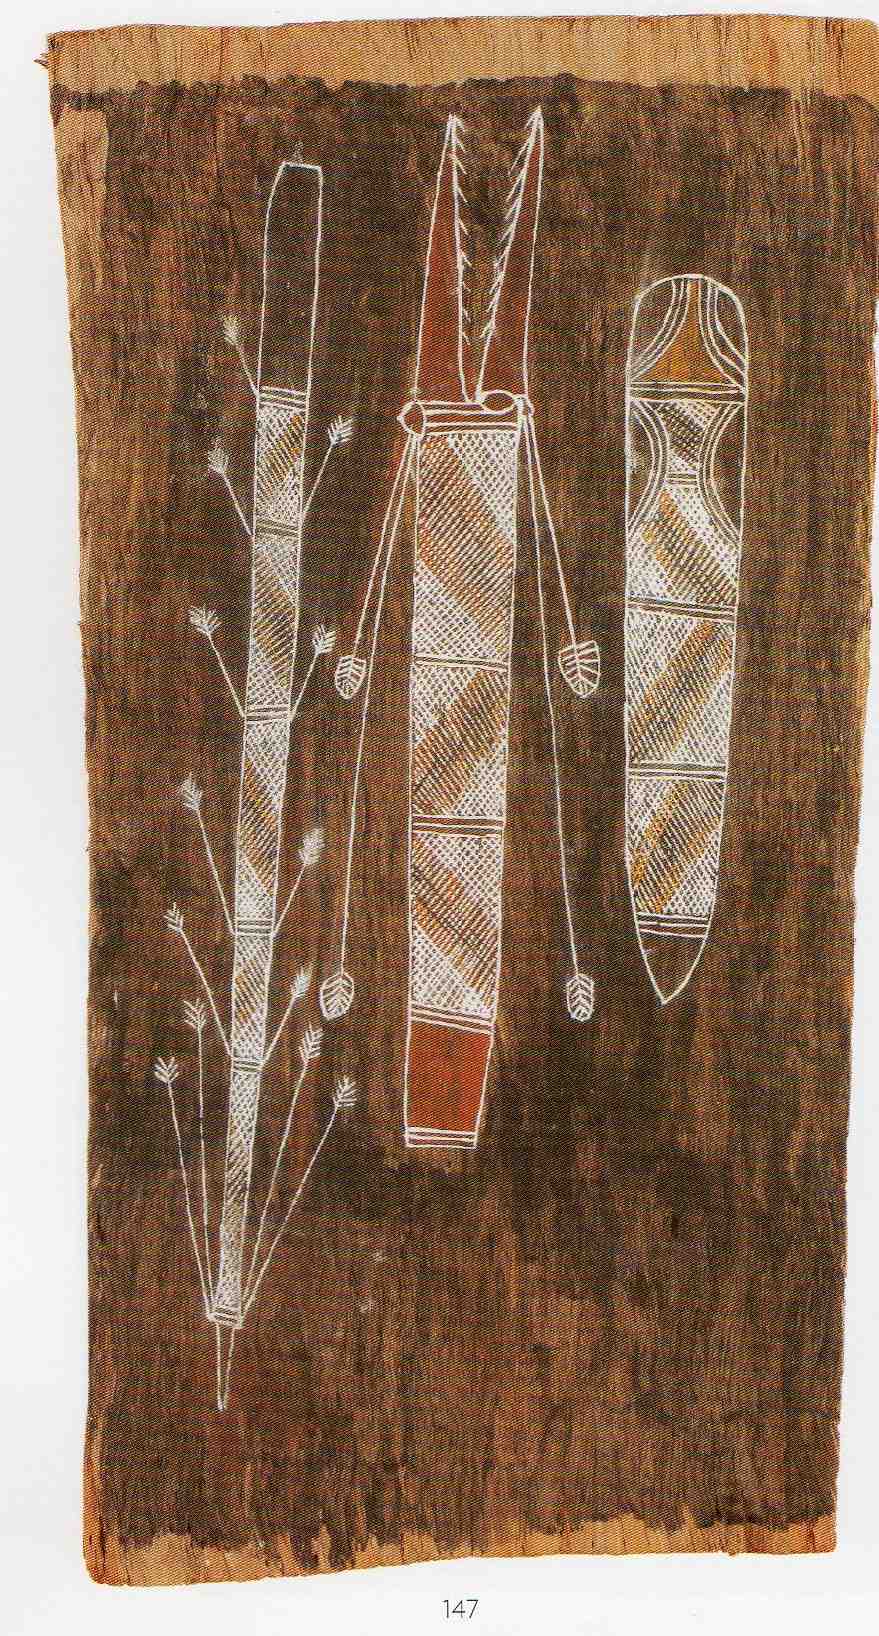 3 totems painted on bark